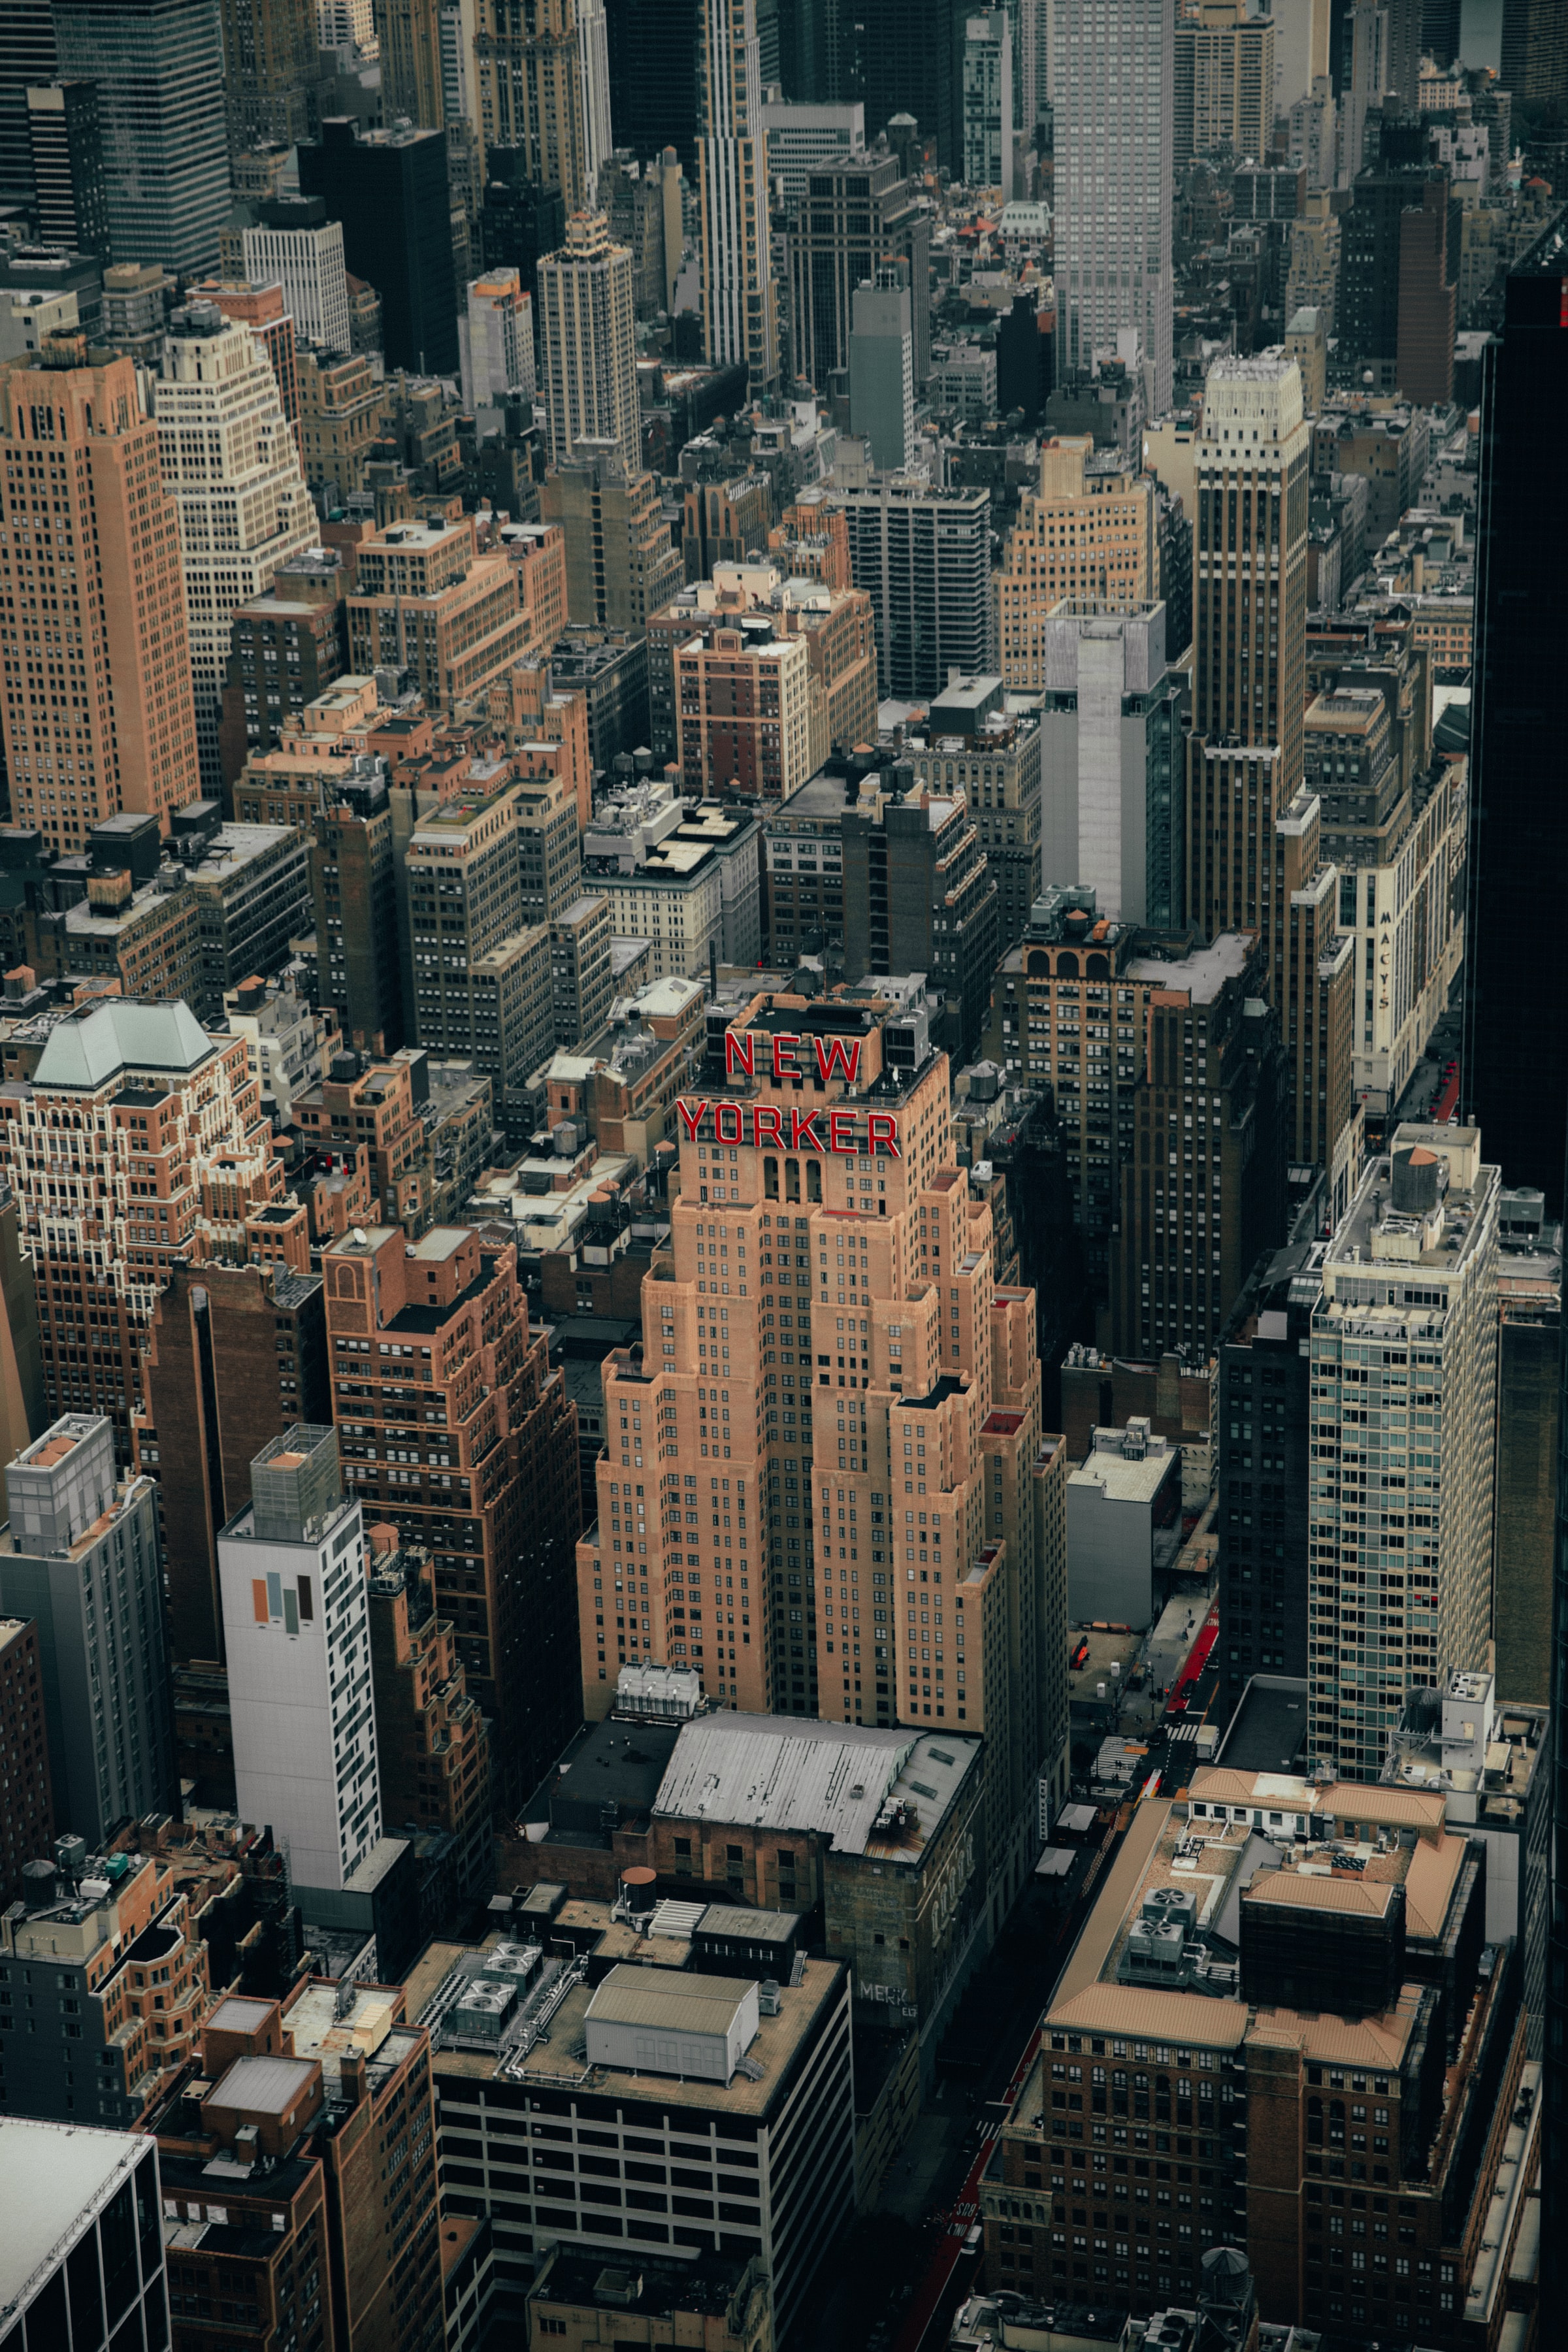 cities, architecture, usa, city, building, view from above, skyscrapers, united states